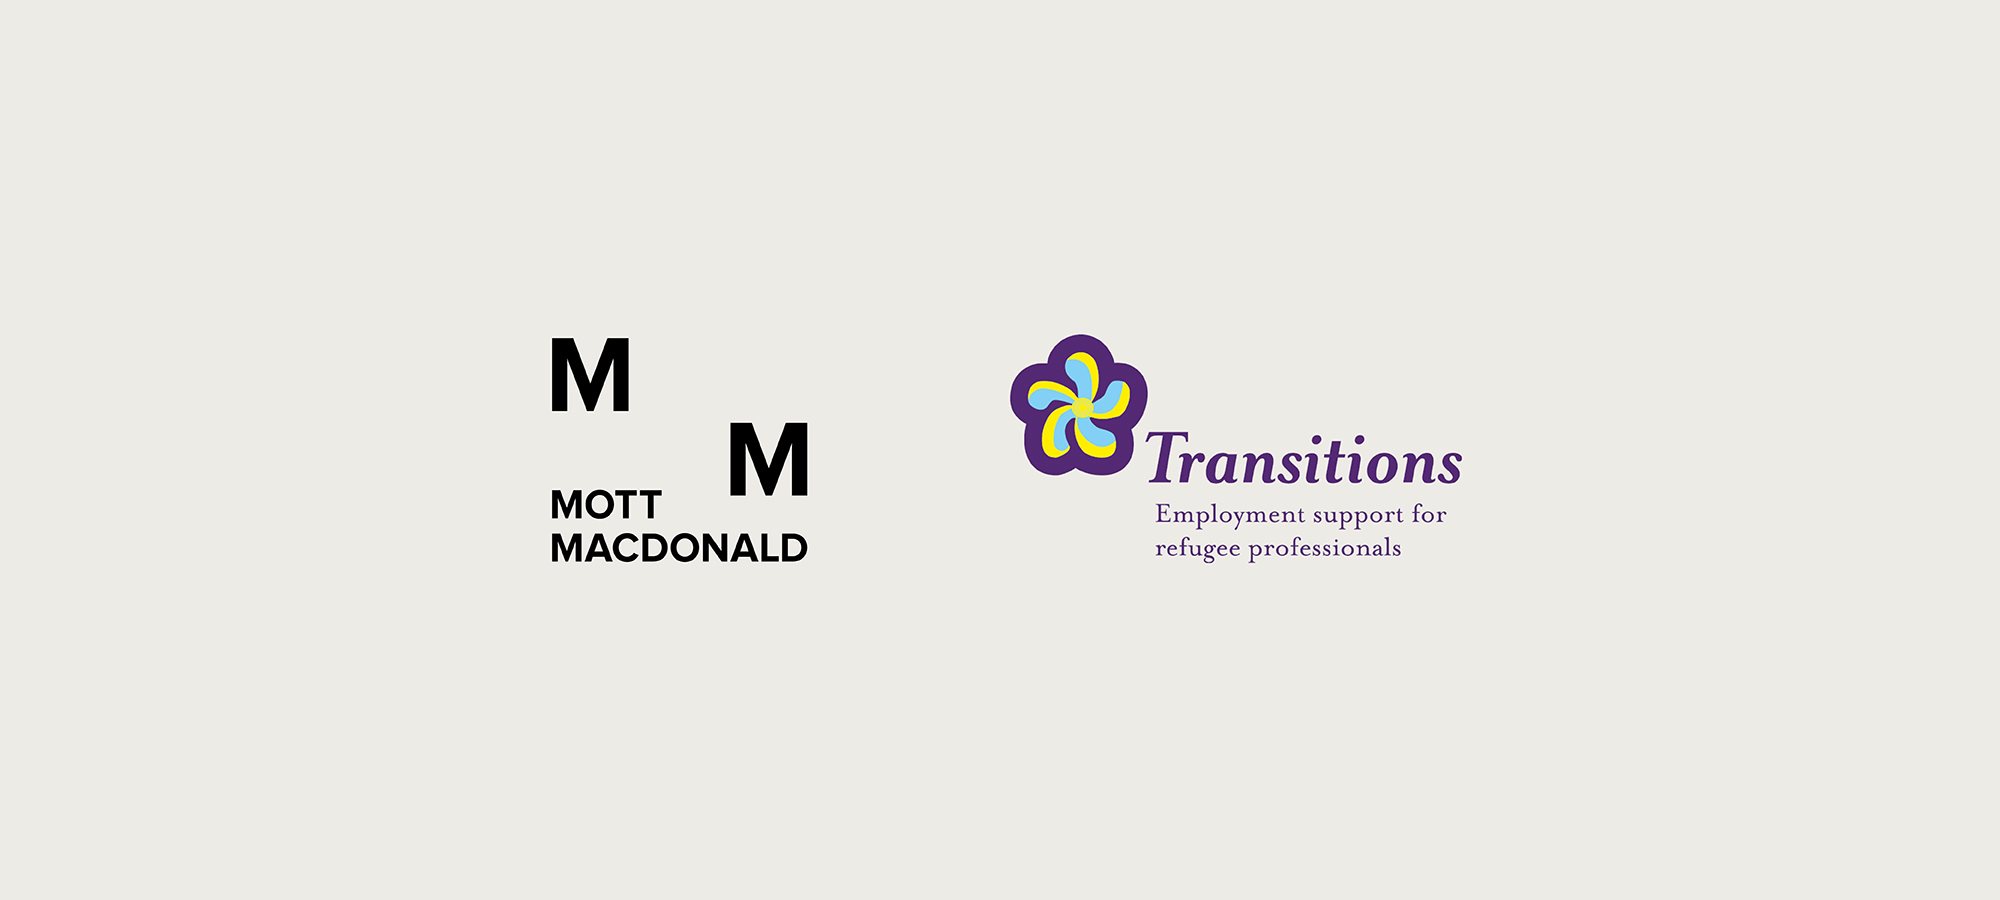 Mott MacDonald and Transitions logo side by side